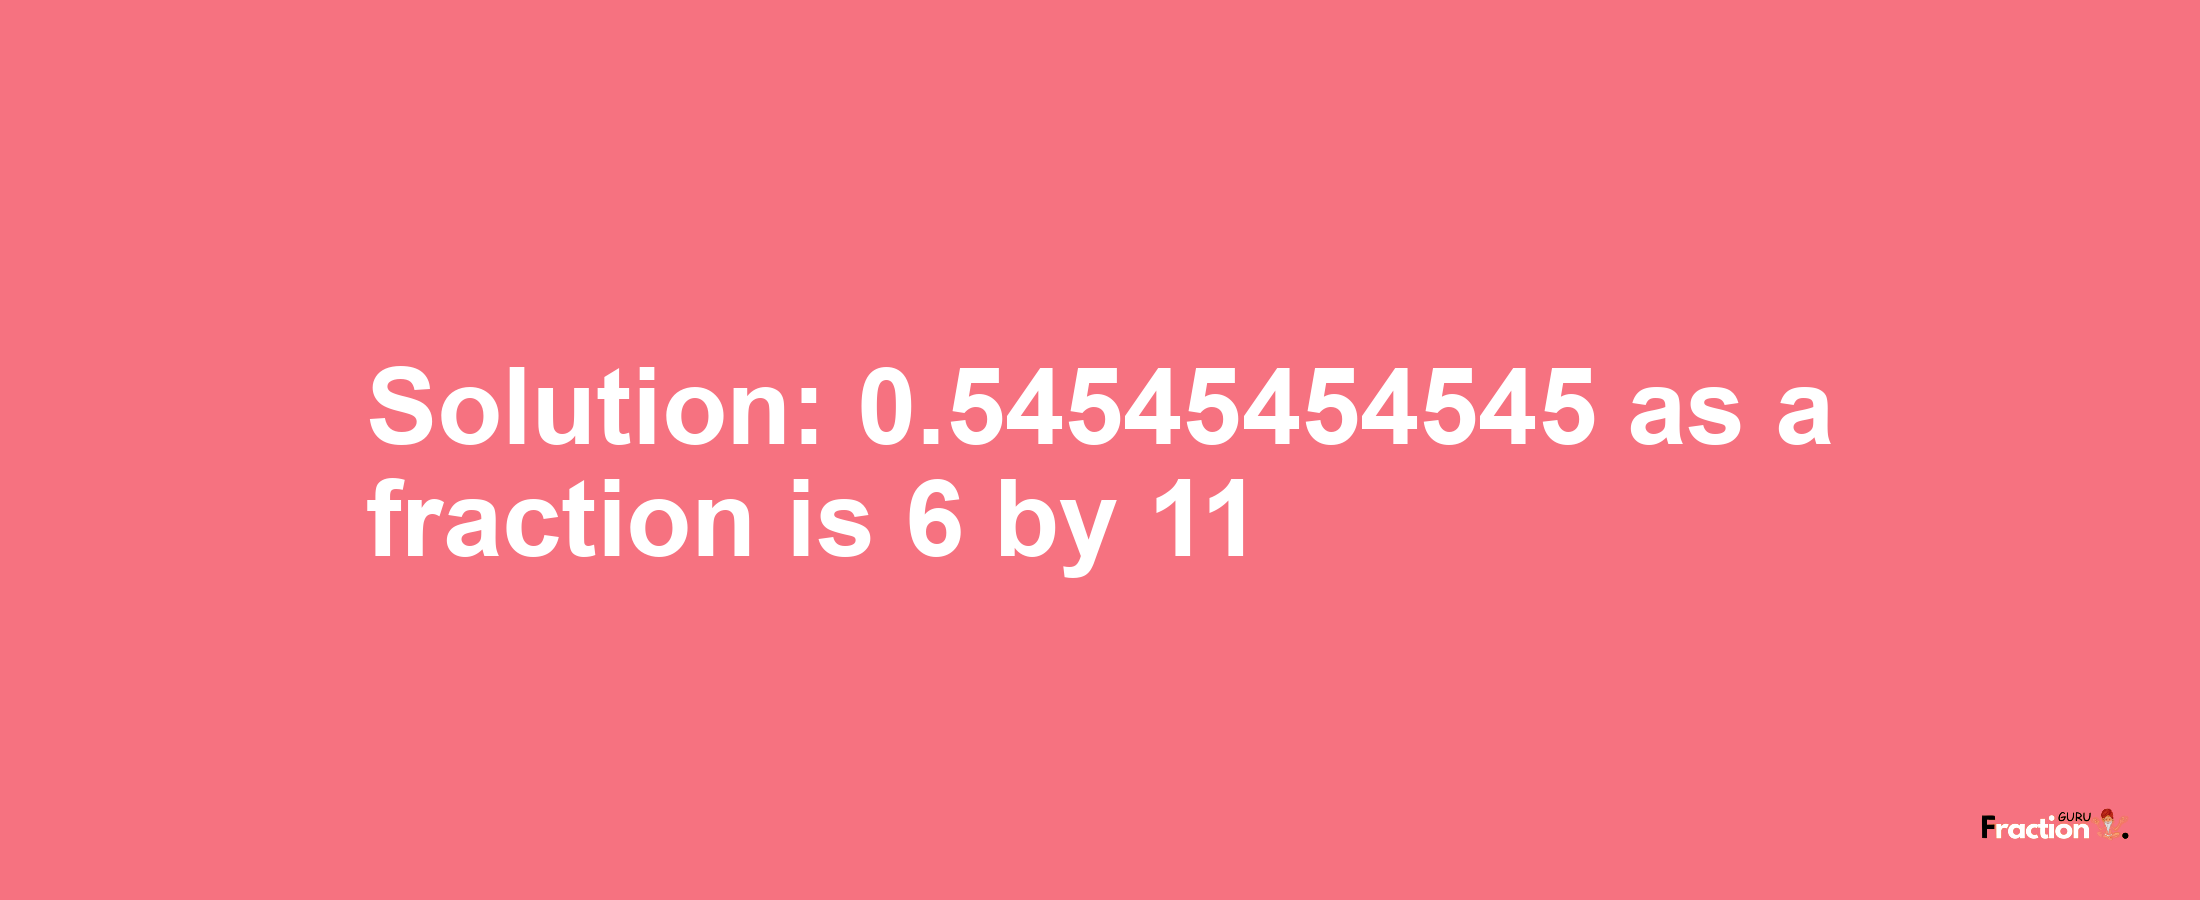 Solution:0.54545454545 as a fraction is 6/11